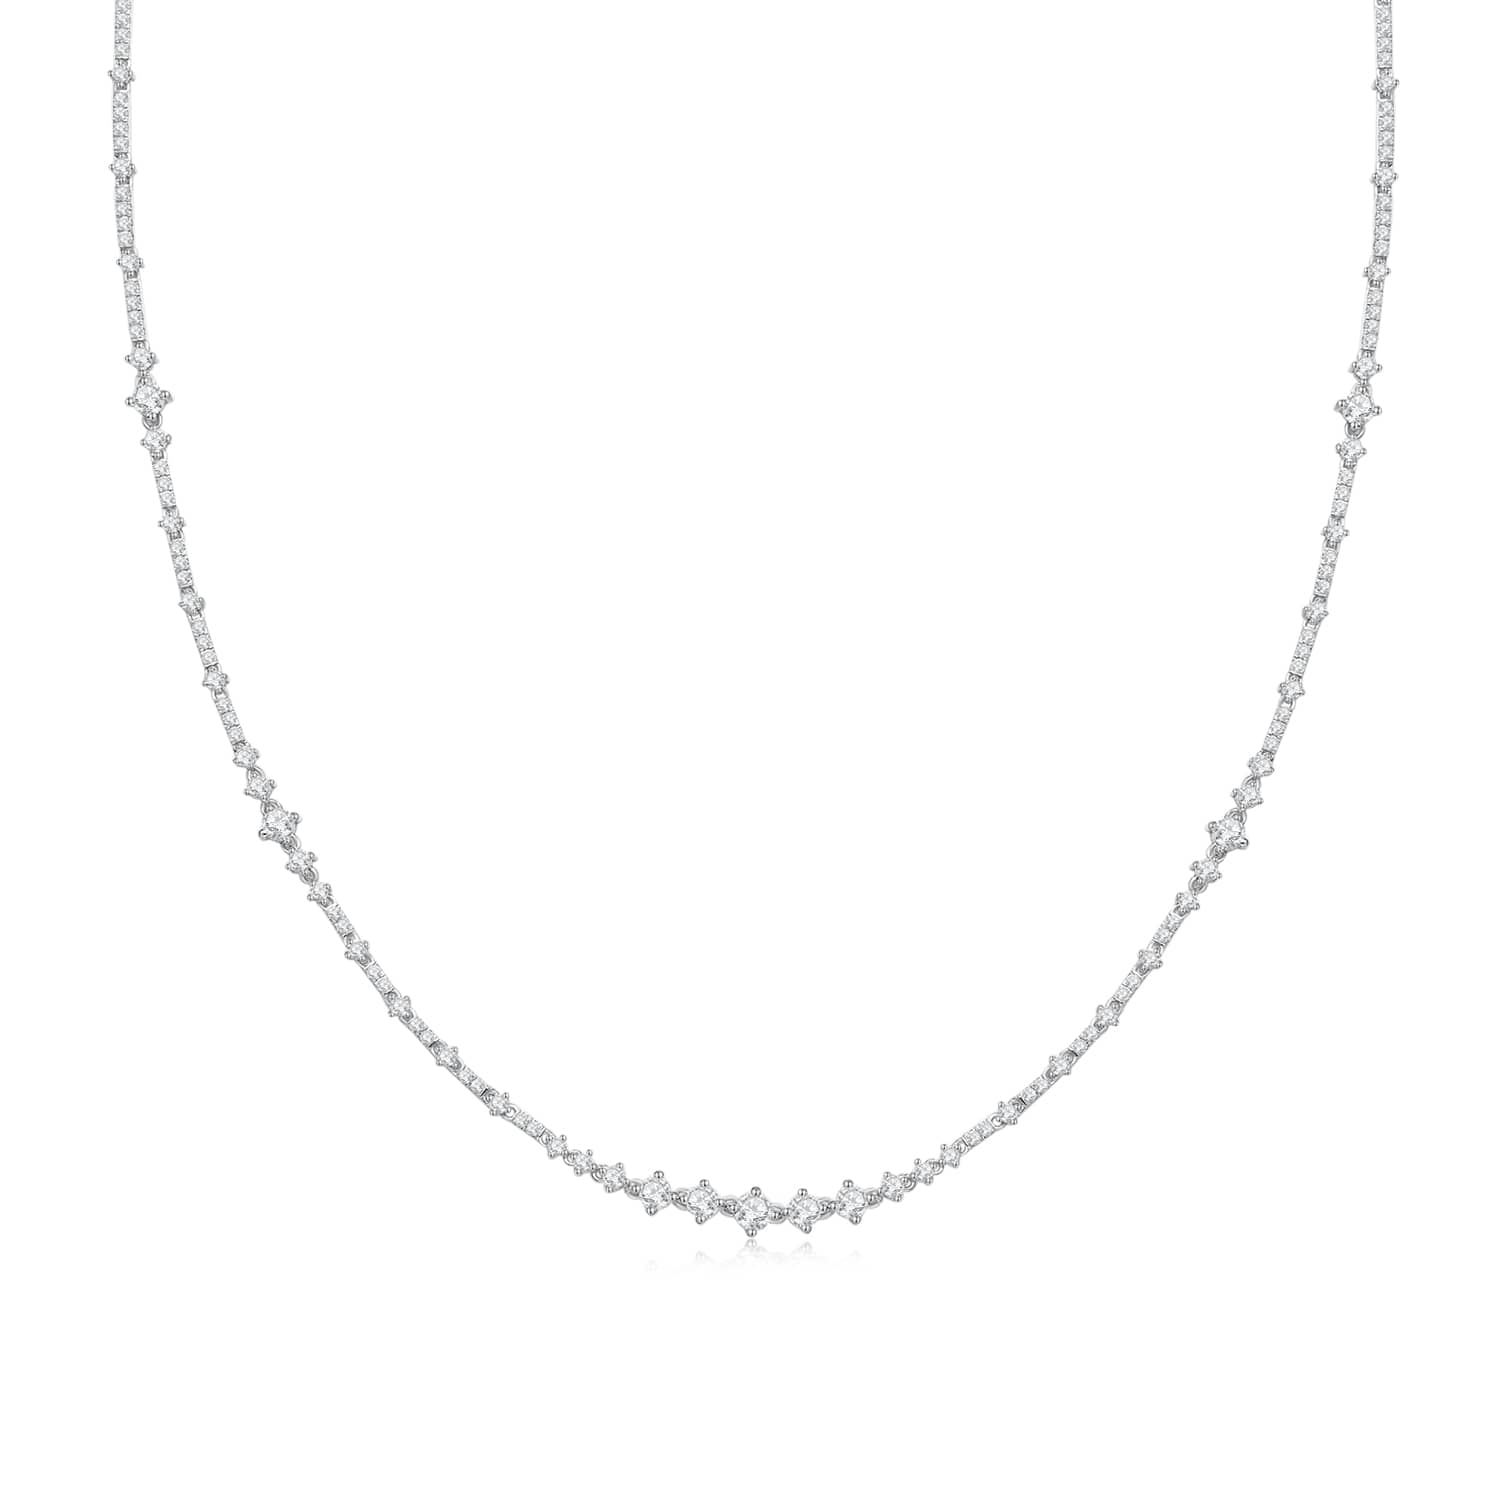 Tabitha Tennis Necklace - Tricia Capsule Collection - Eclat by Oui